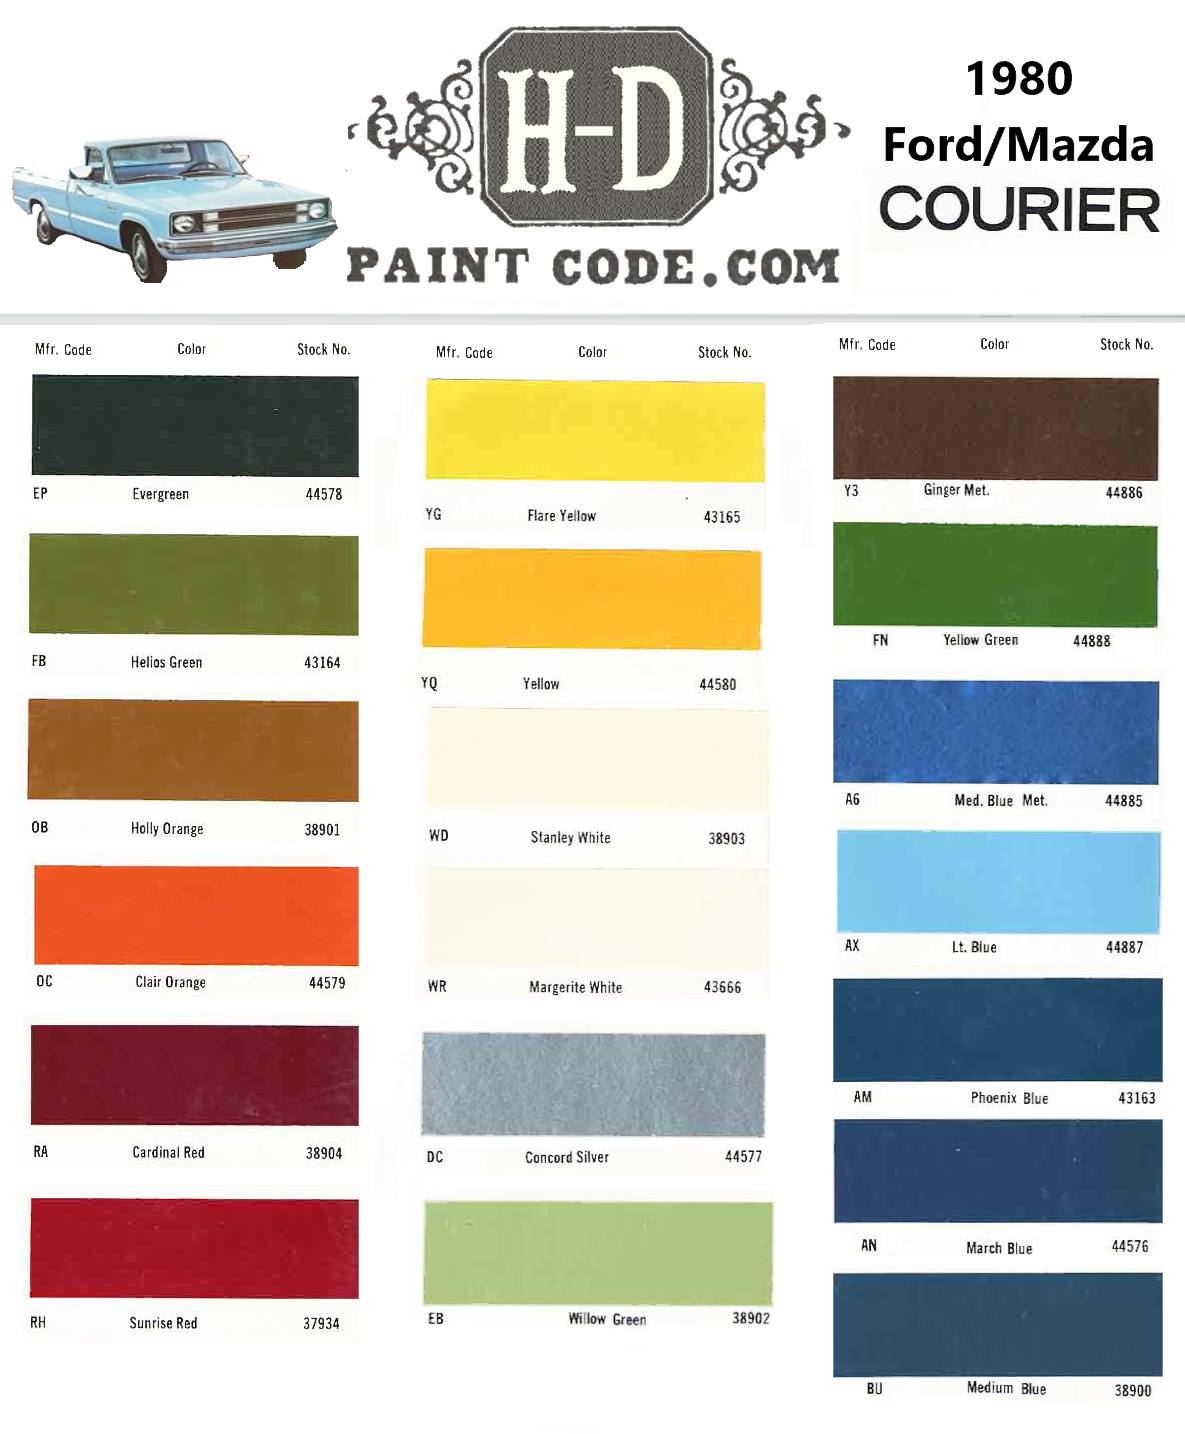 Colors used on Courier trucks till 1980